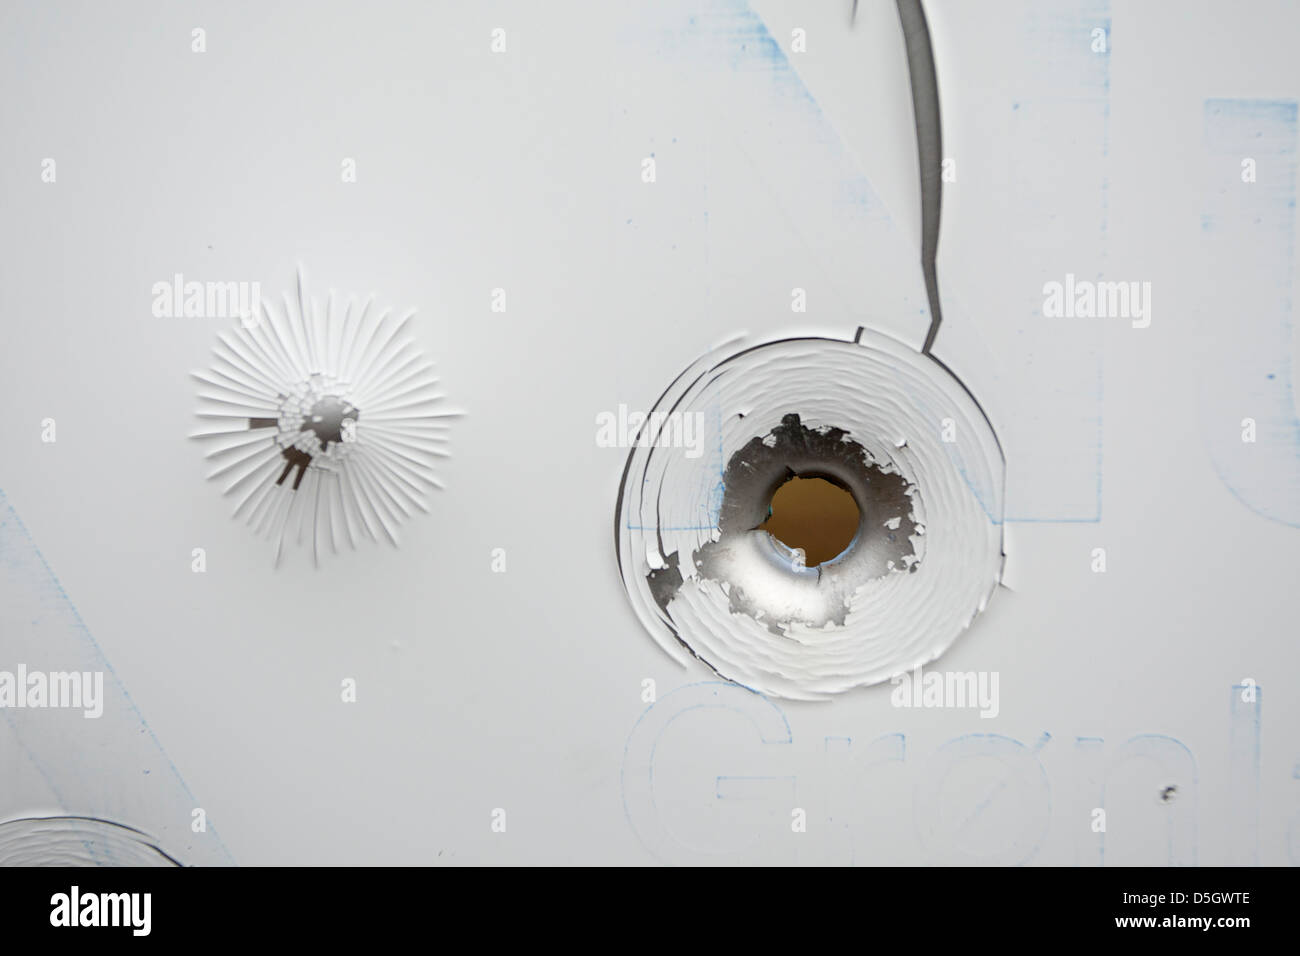 Bullet hole in metal sign Stock Photo